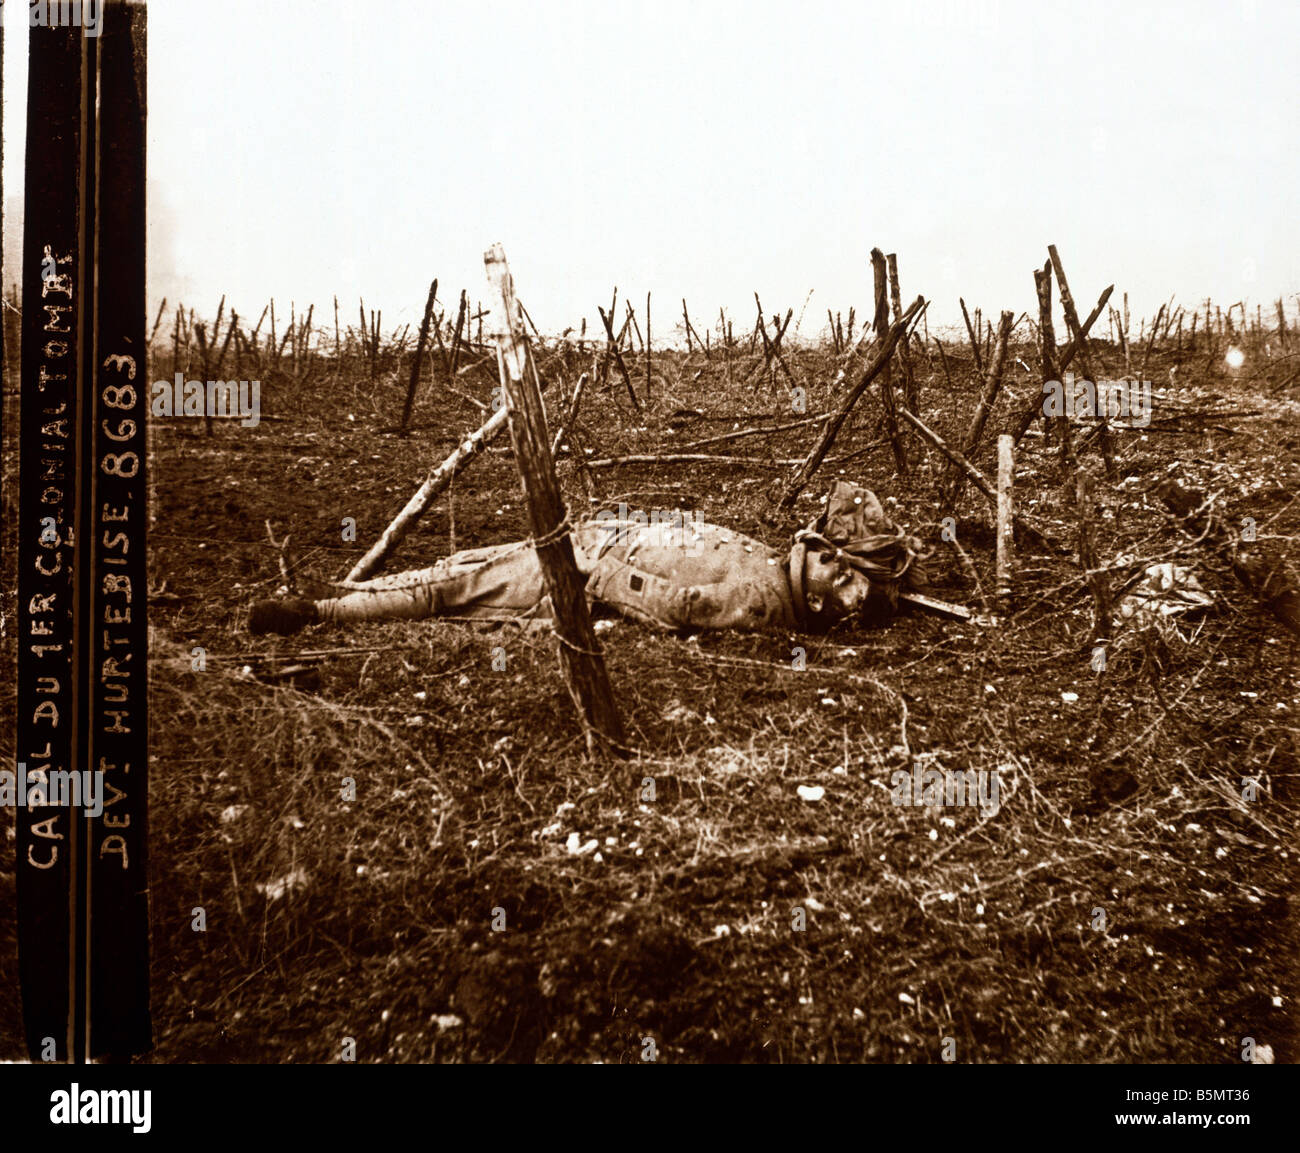 9FK 1917 4 16 A1 Fallen French soldier at Hurtebise 1917 World War 1 1914 18 France Battle of the Aisne and of Champagne 6th Apr Stock Photo